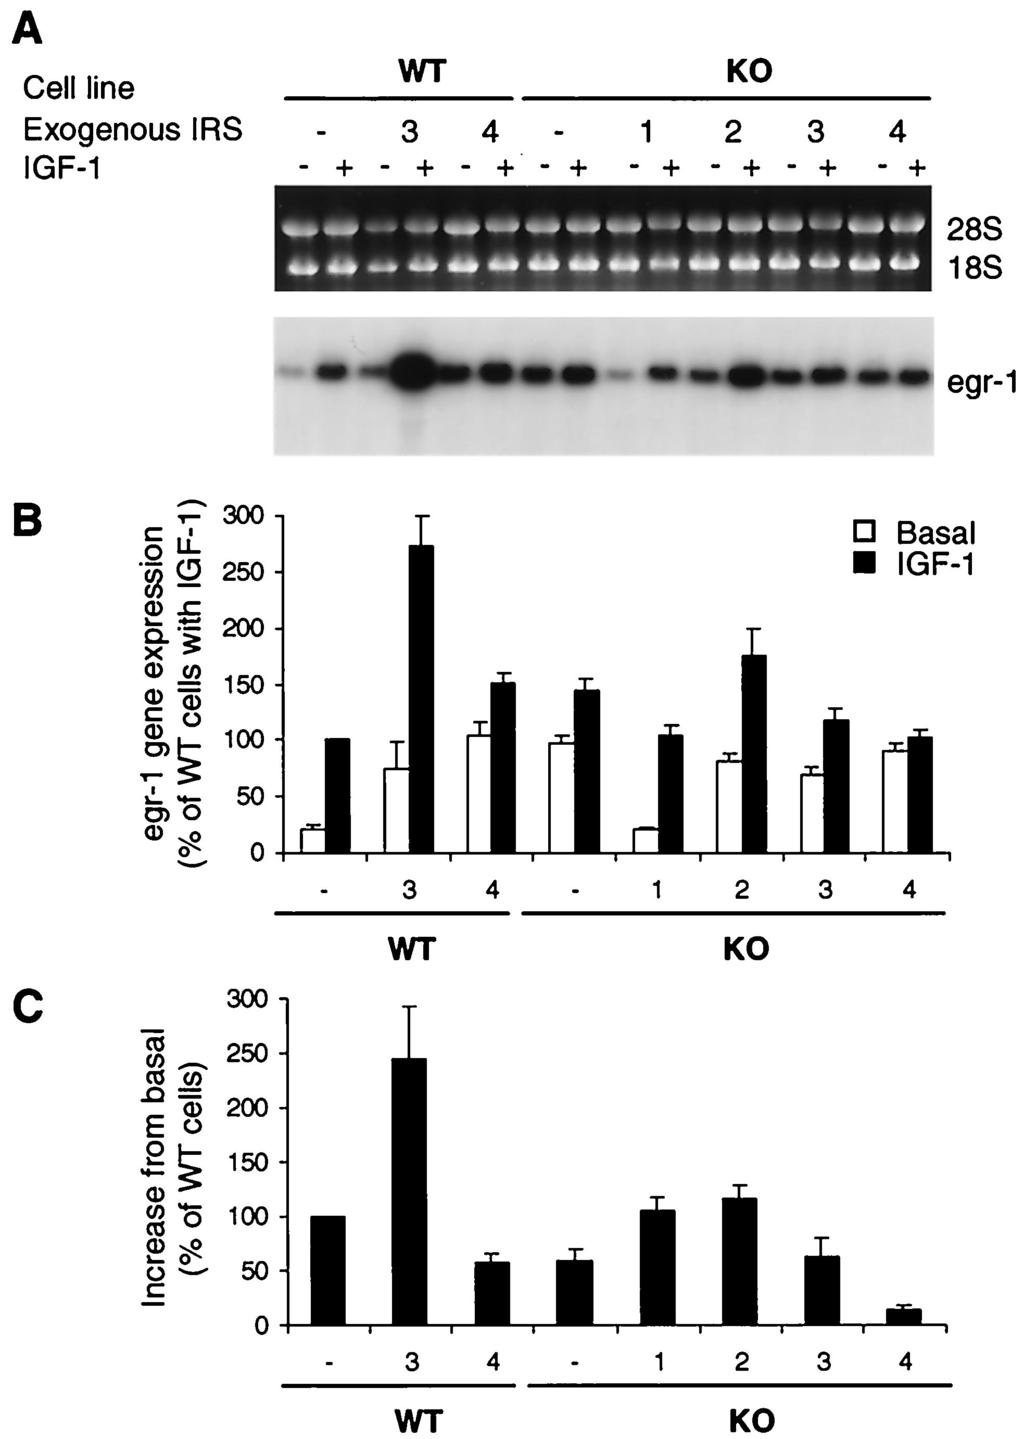 VOL. 21, 2001 ROLE OF IRS-3 AND IRS-4 IN IGF-1 SIGNALING 35 FIG. 9. Effect of IRS protein overexpression on IGF-1-induced immediate-early gene expression.